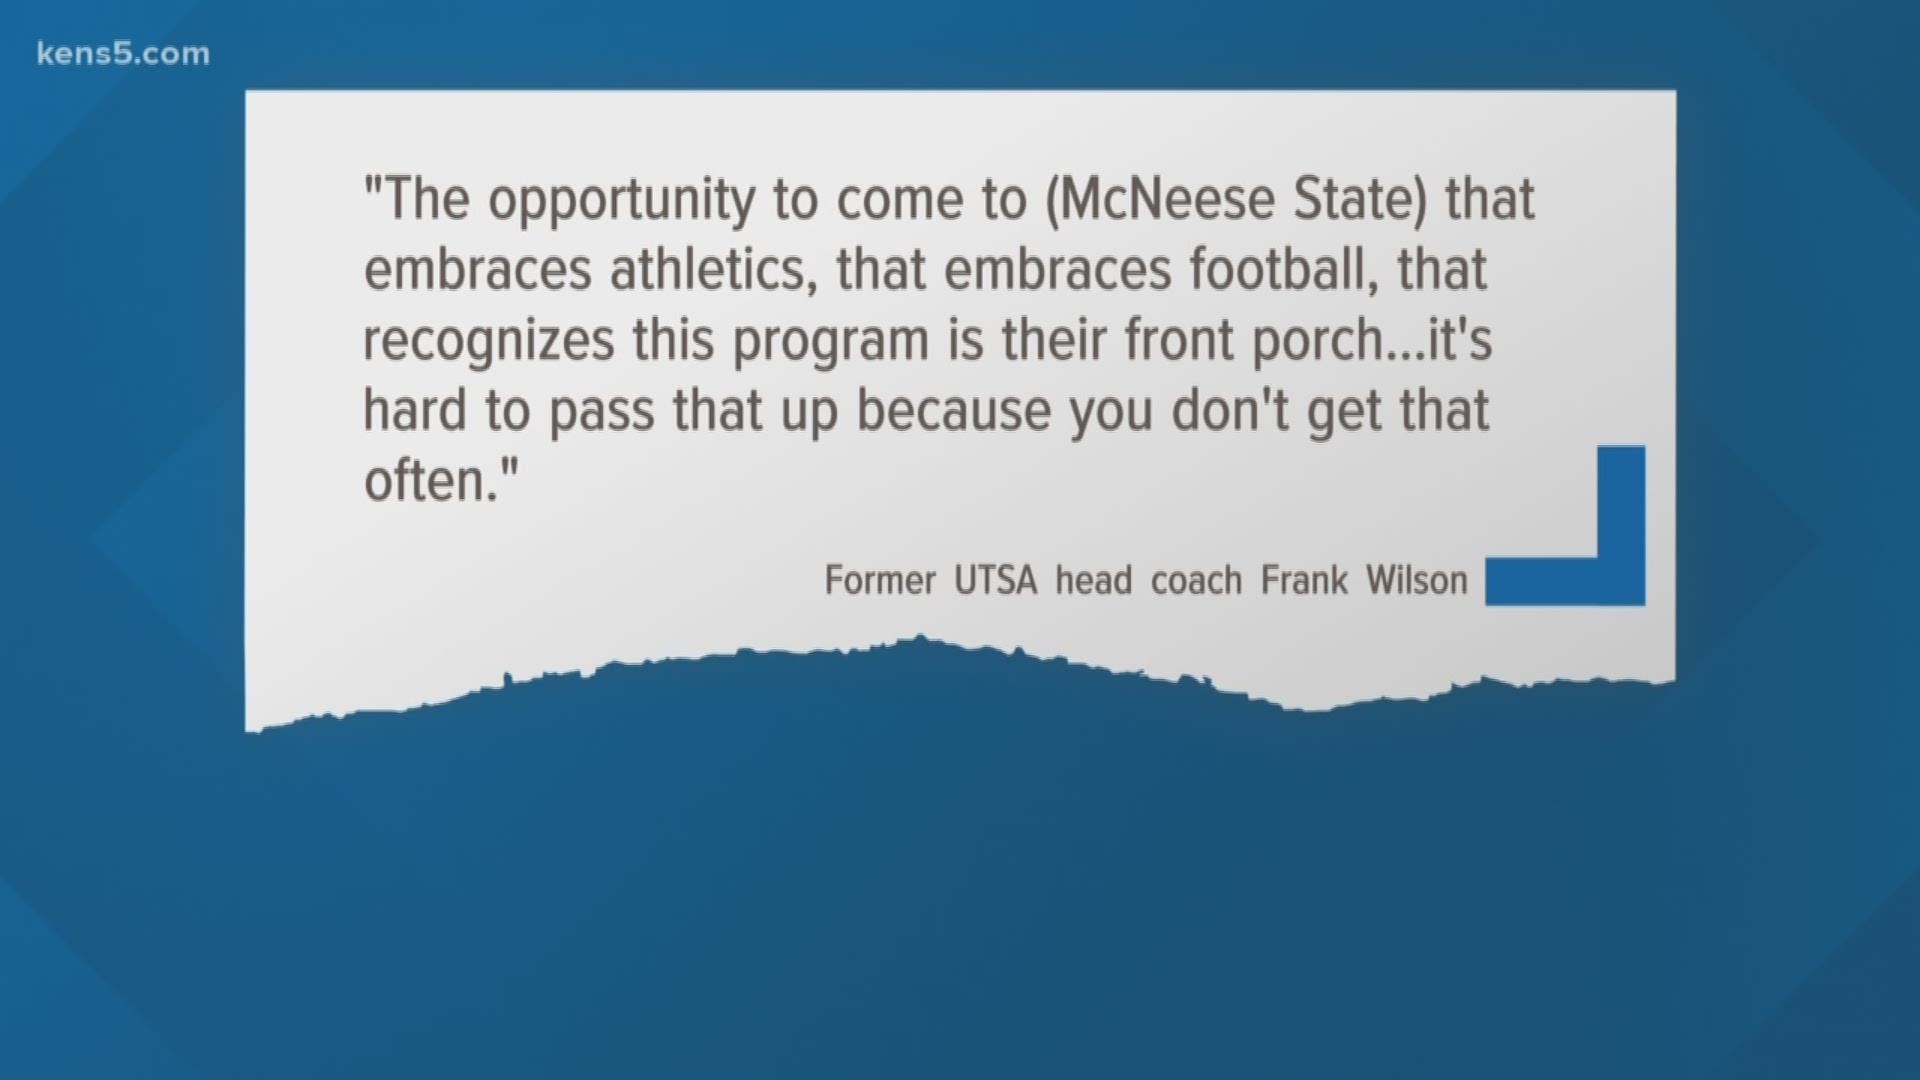 Earlier this week former UTSA head coach Frank Wilson accepted the same position at McNeese State and let's just say he still might be a bit bitter over the firing l